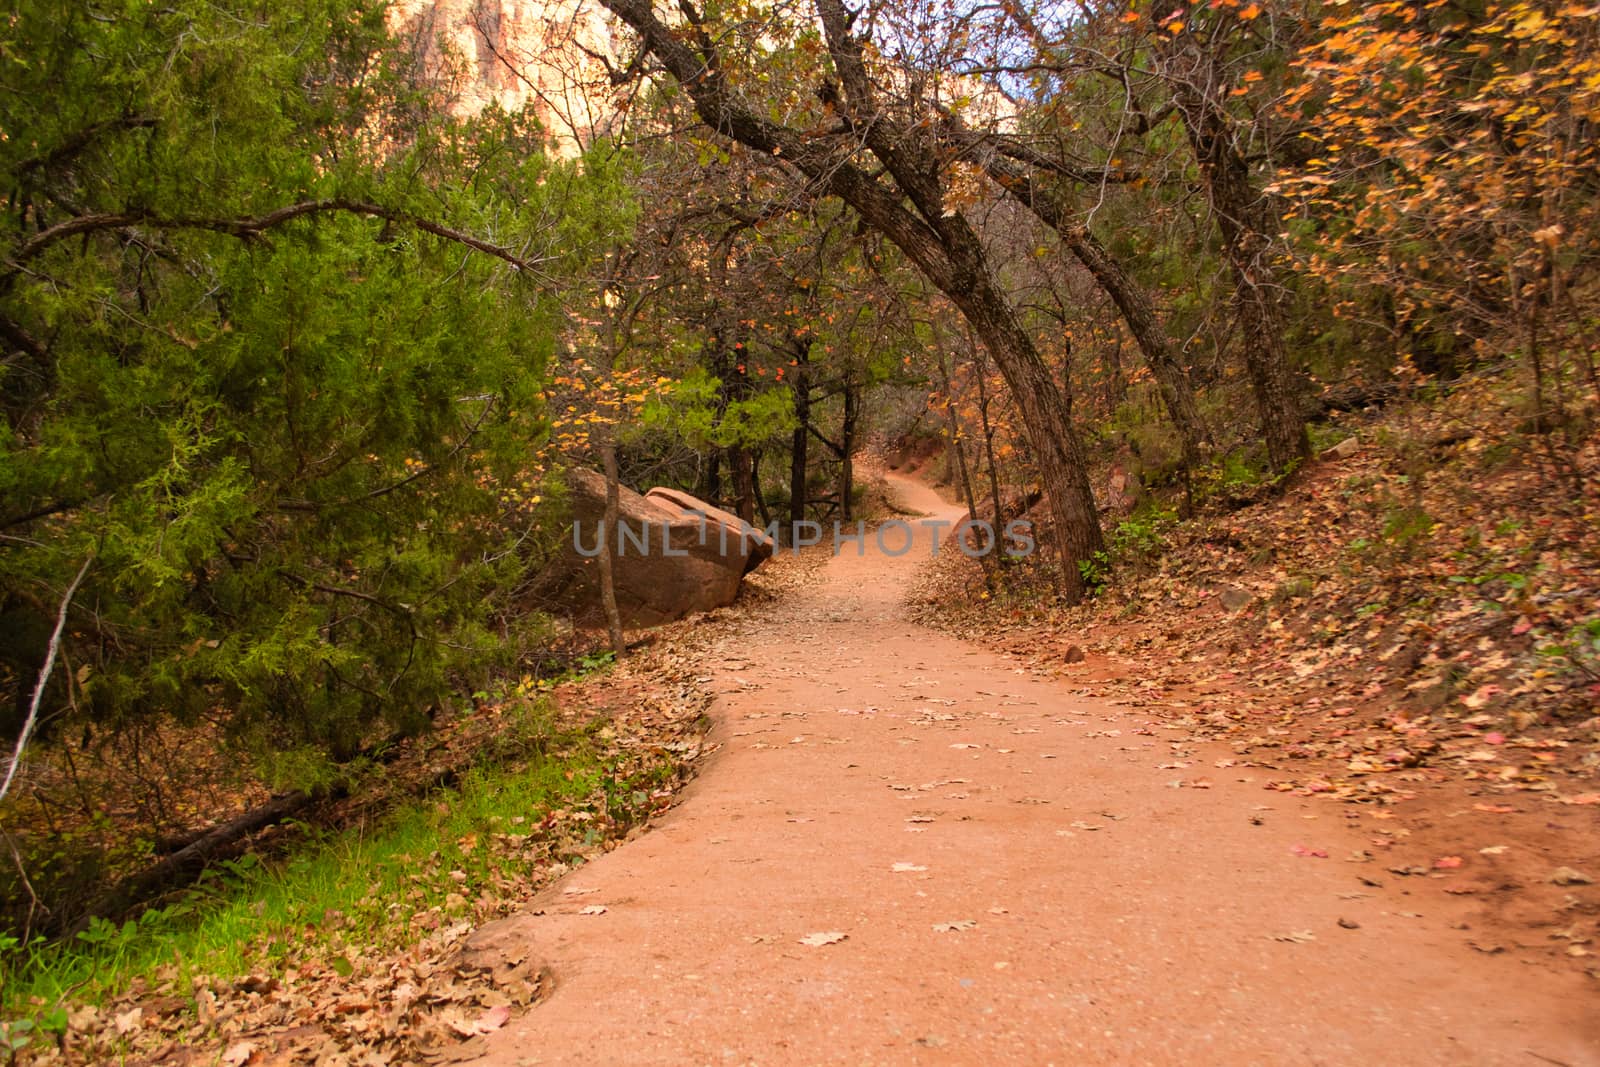 View on a hiking footpath in Zion national park in Utah, United States. Travel and tourism.